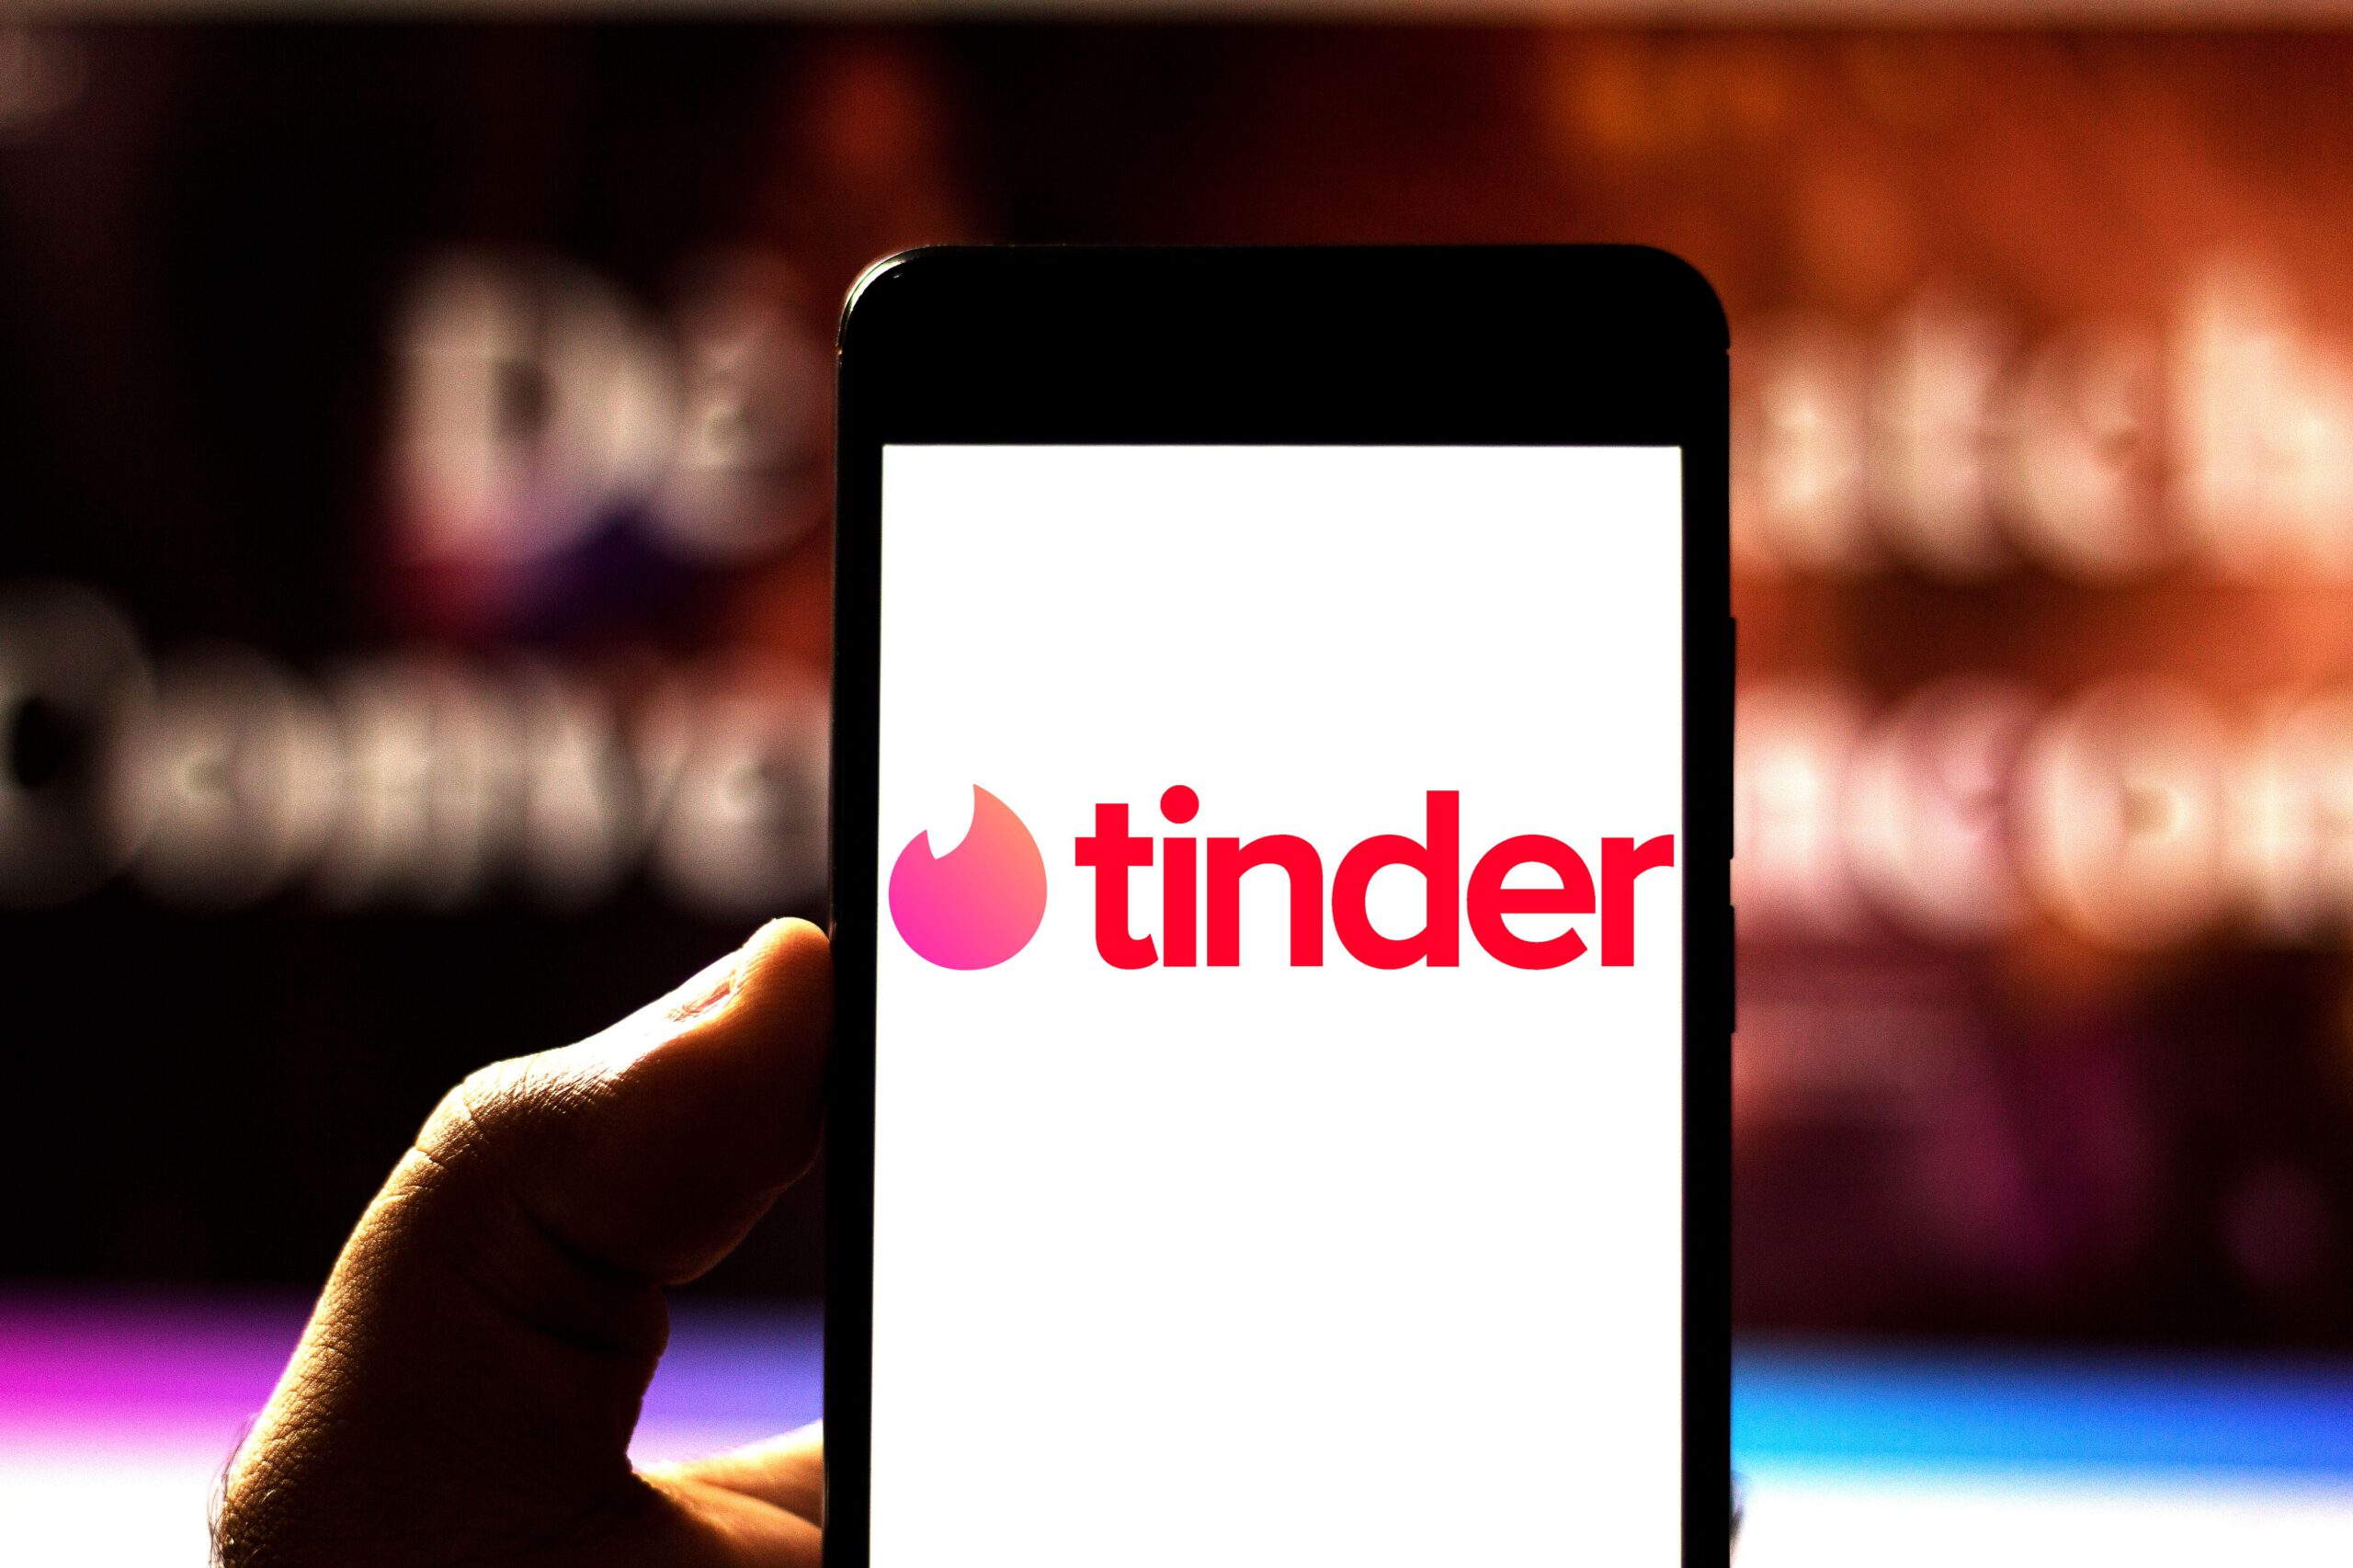 Tinder CEO says he's not worried about competition from Facebook